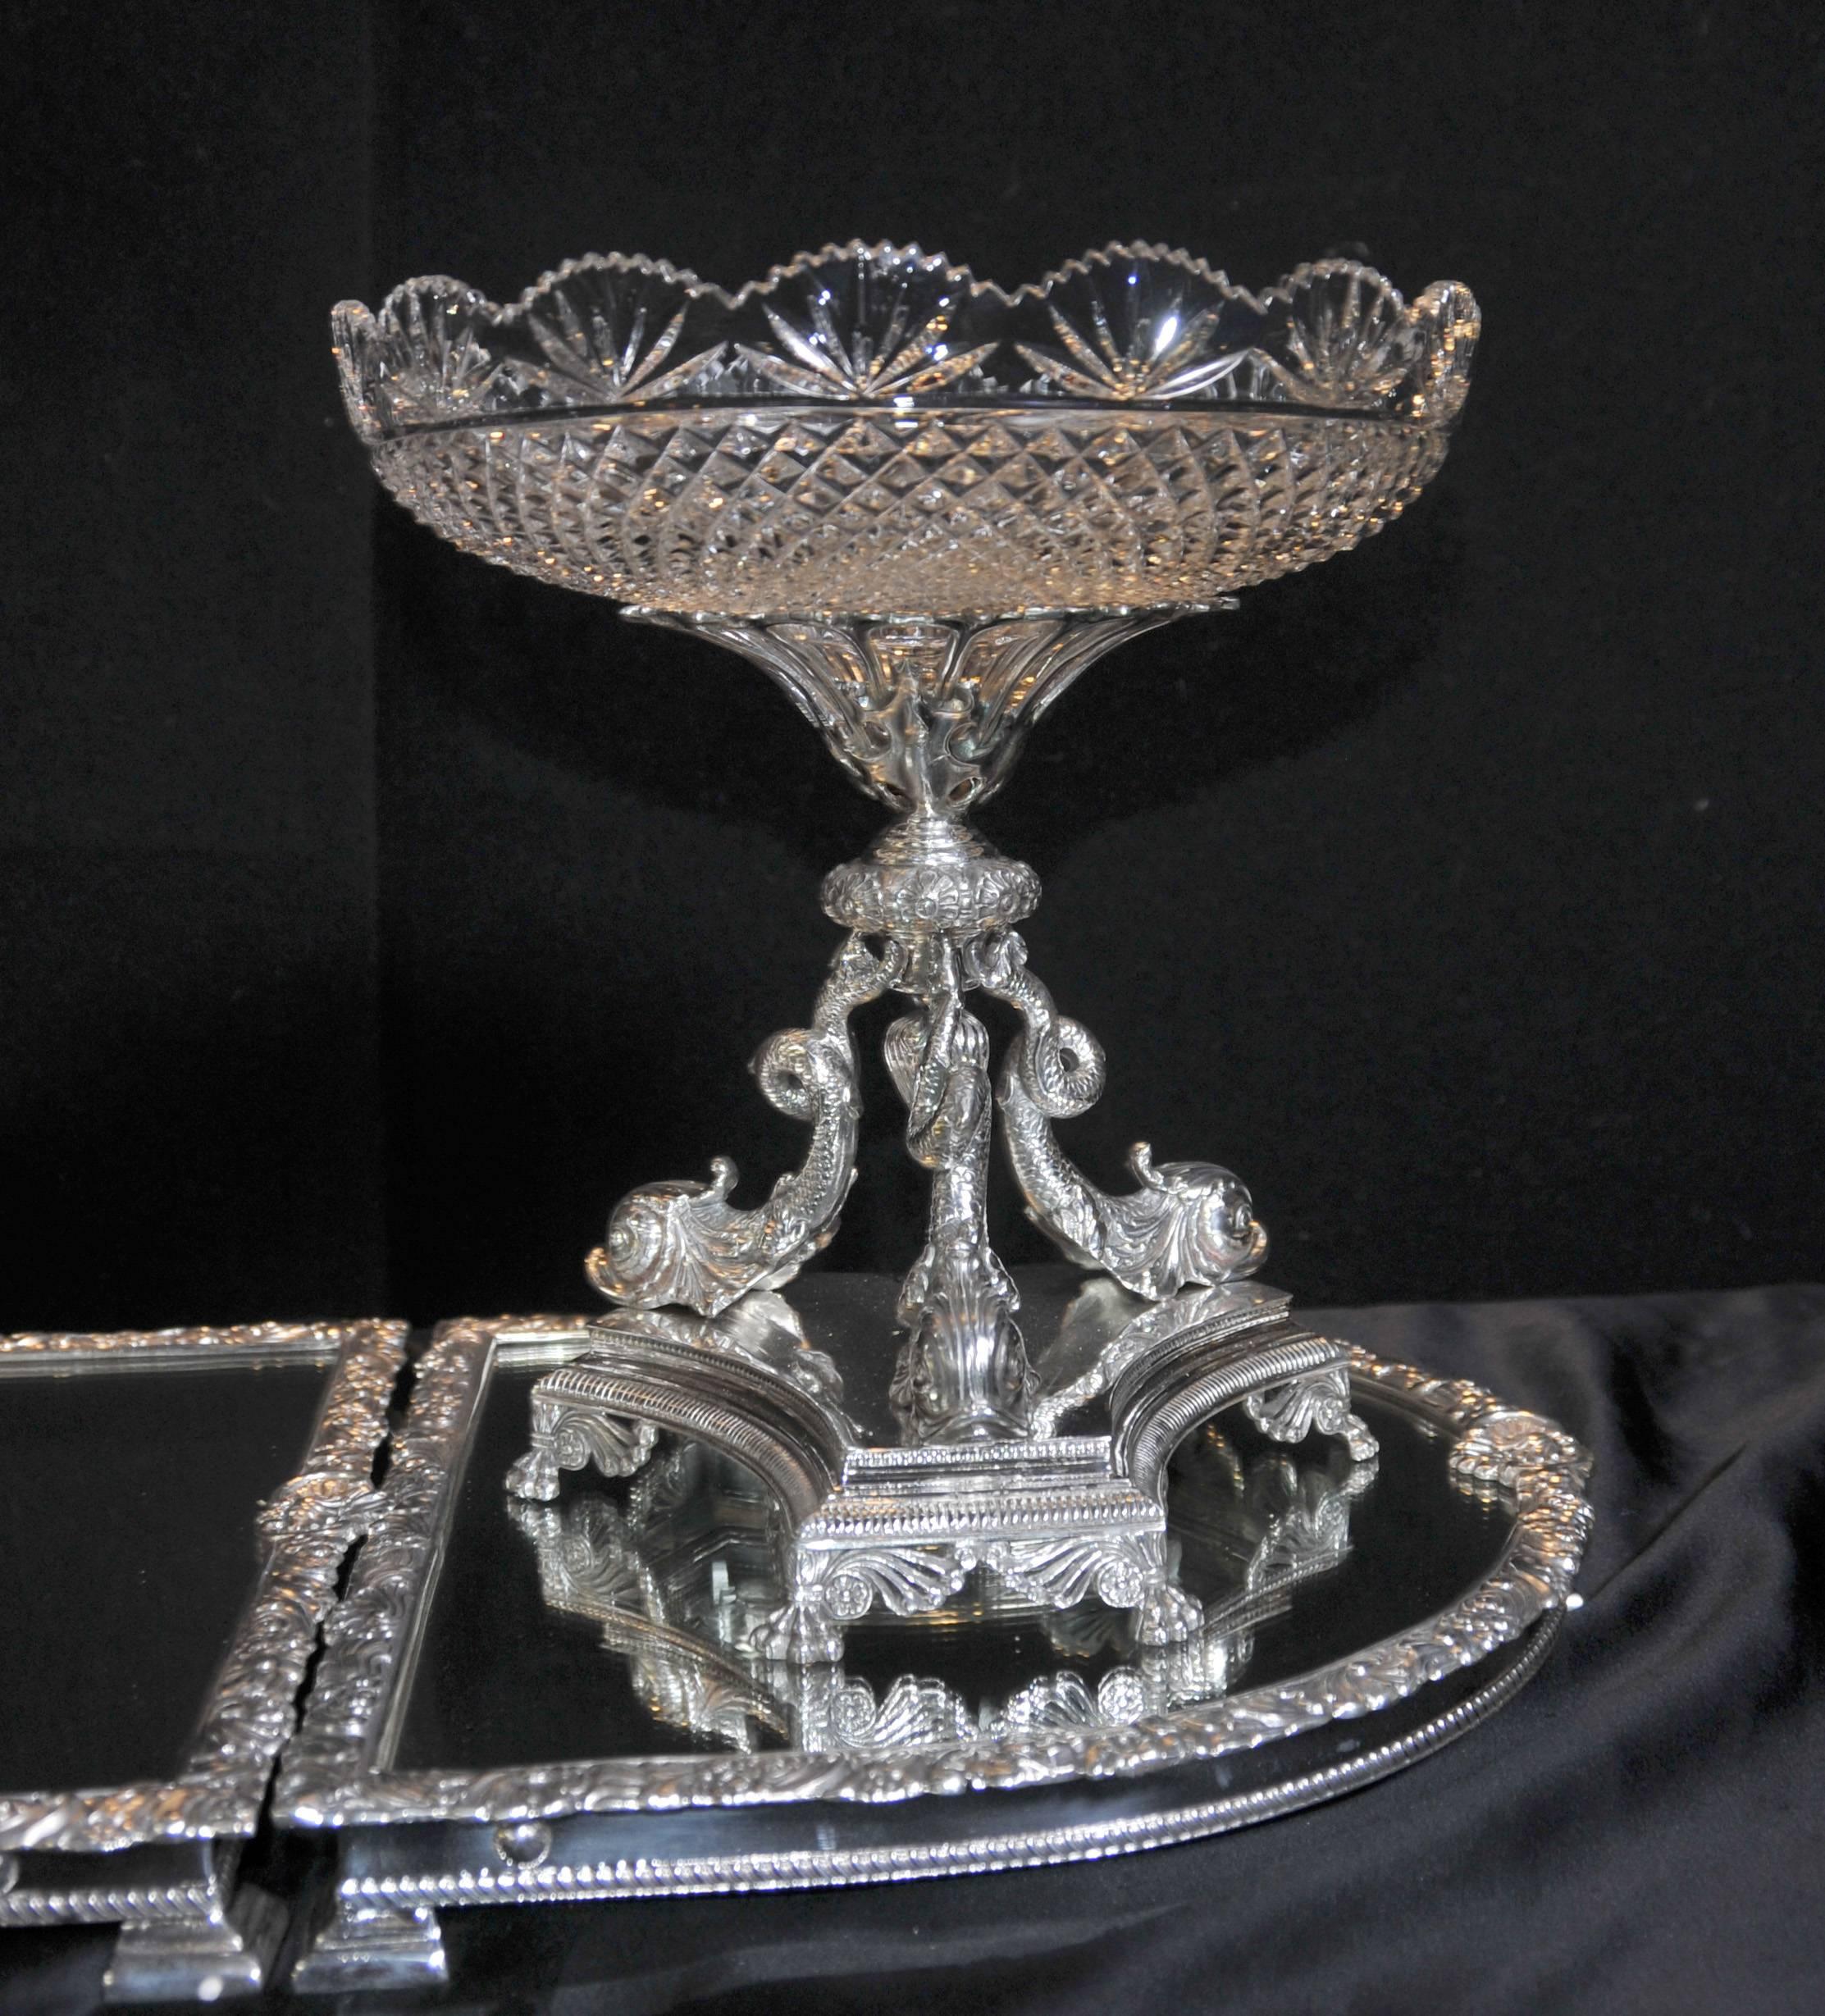 Hard to describe this stunning work of art and craftsmanship, hope the photos do it some justice!
You are viewing a gorgeous English Sheffield silver plate centerpiece.
Comprised of two smaller dishes, the large central column all situated on the